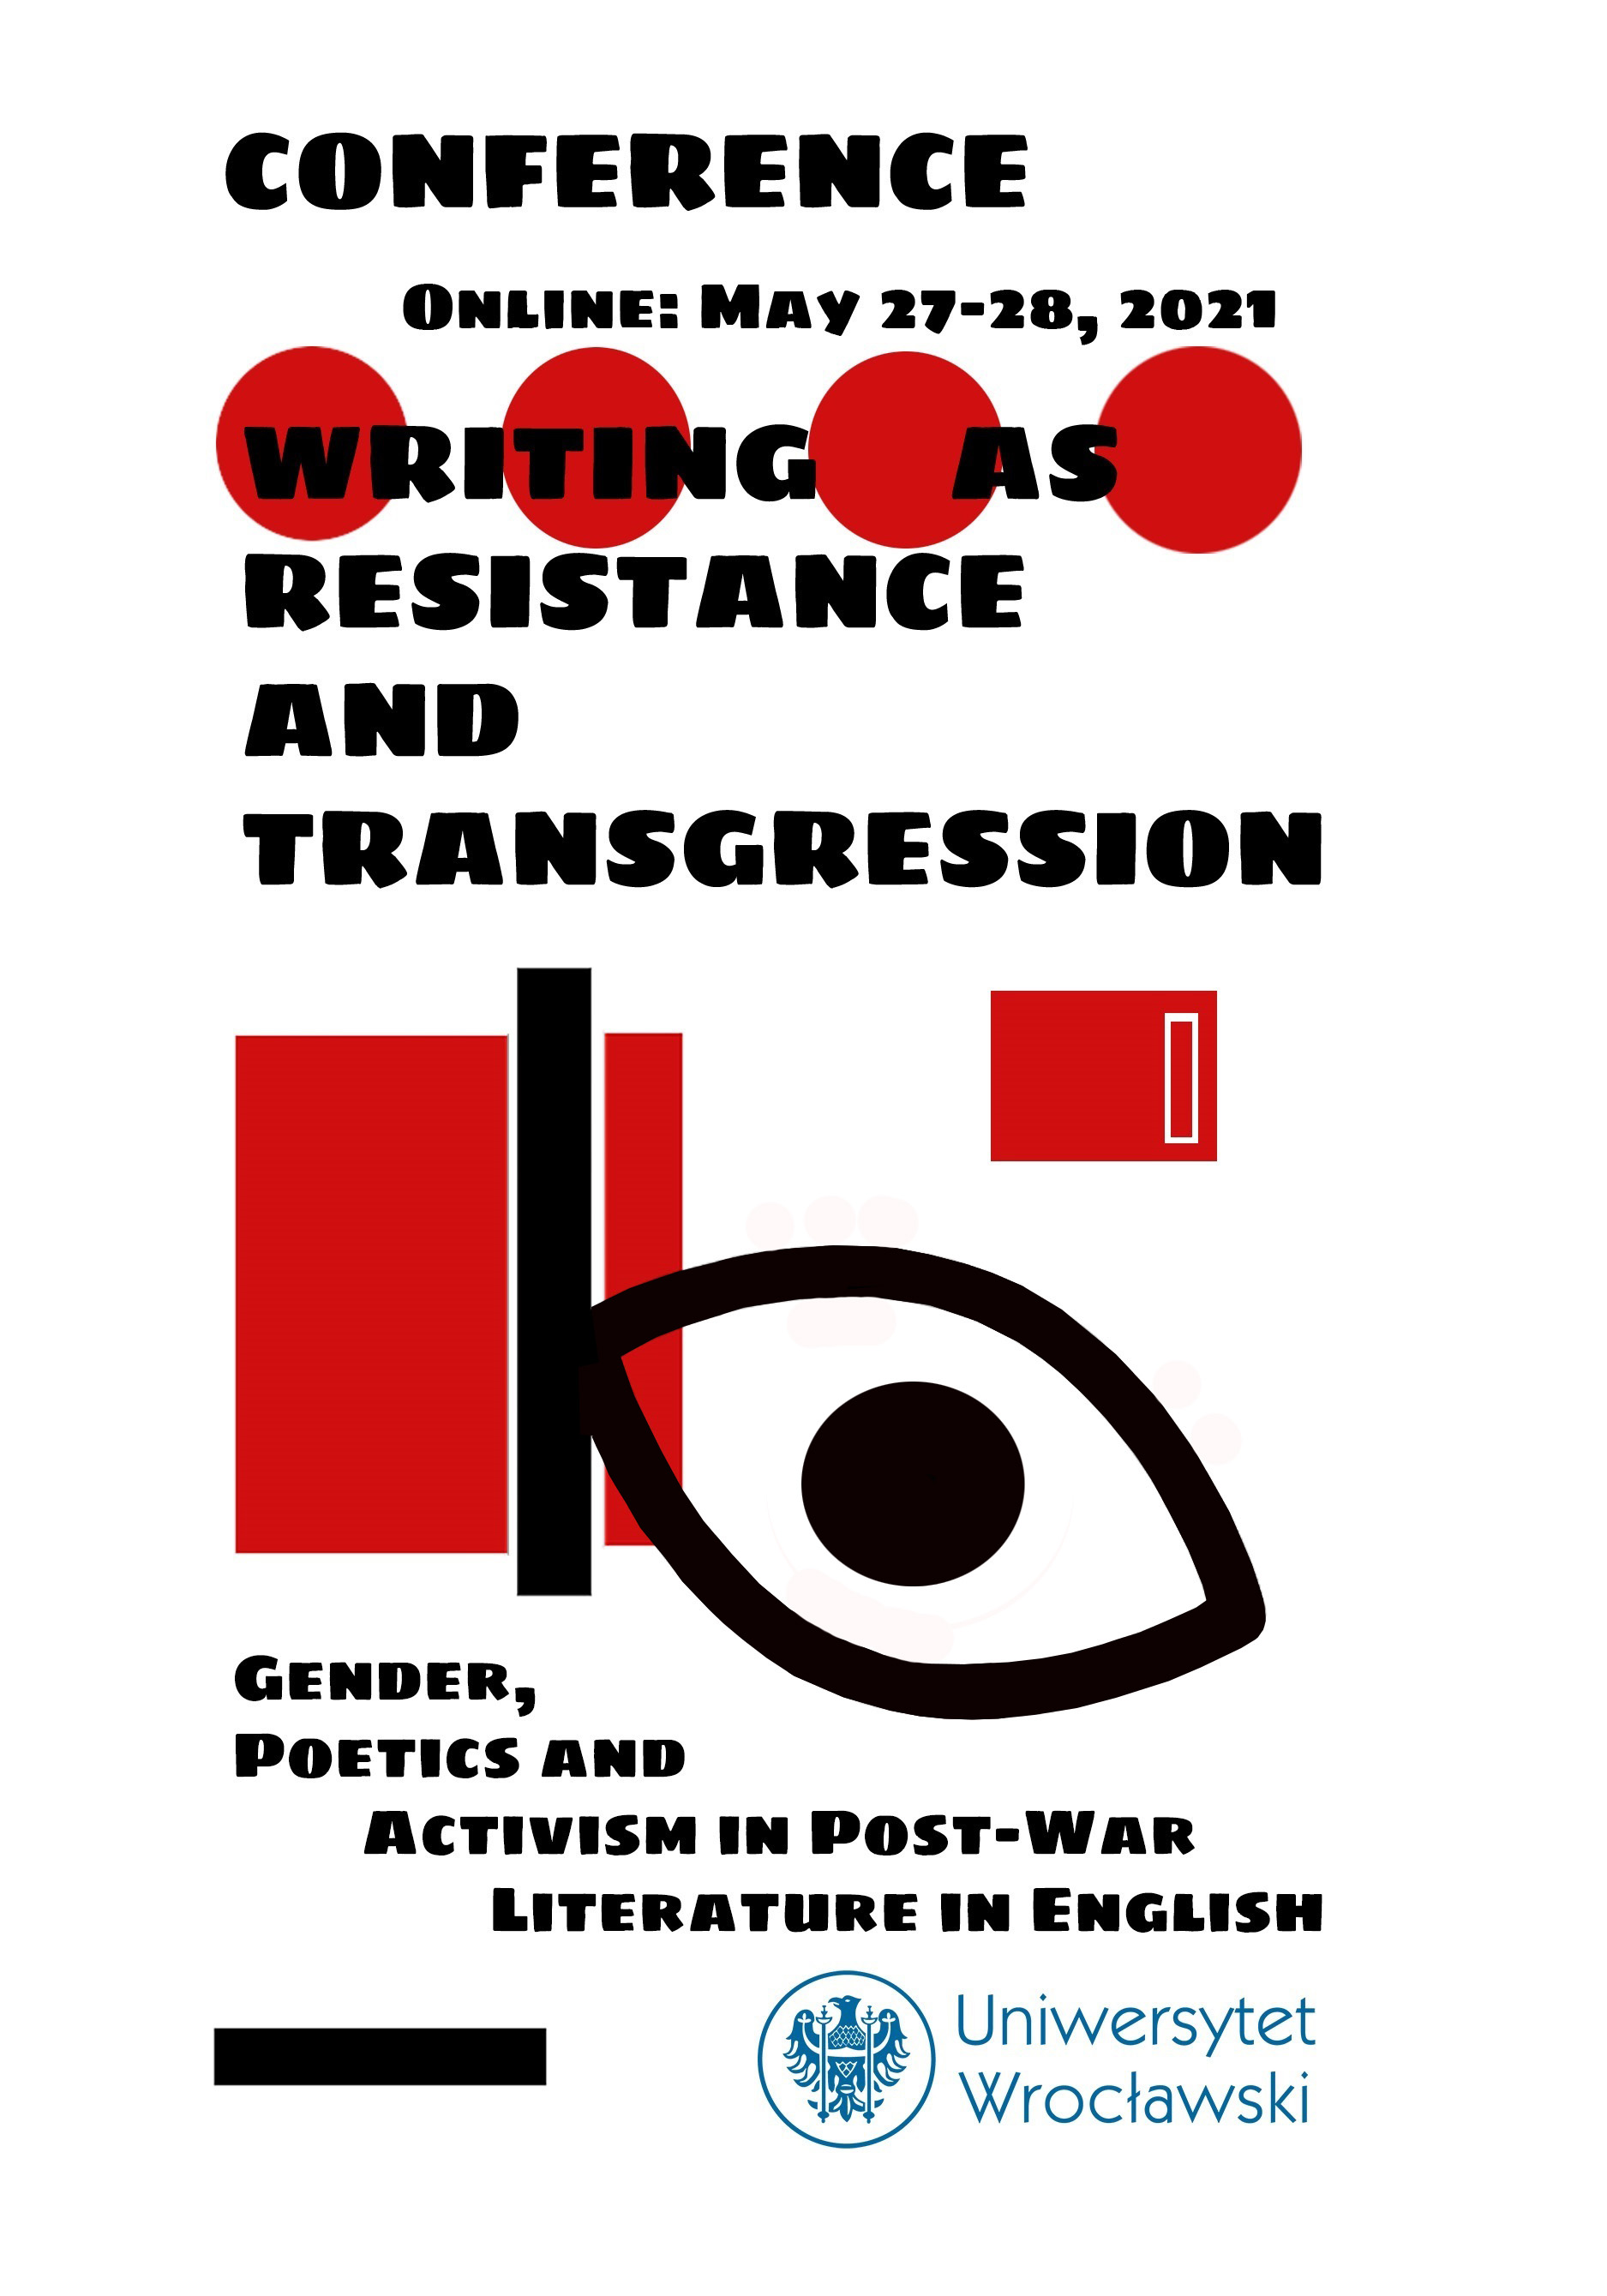 Attachment post-531212-Poster_WritingAsResistance_UWr_IFA_Conference.jpg